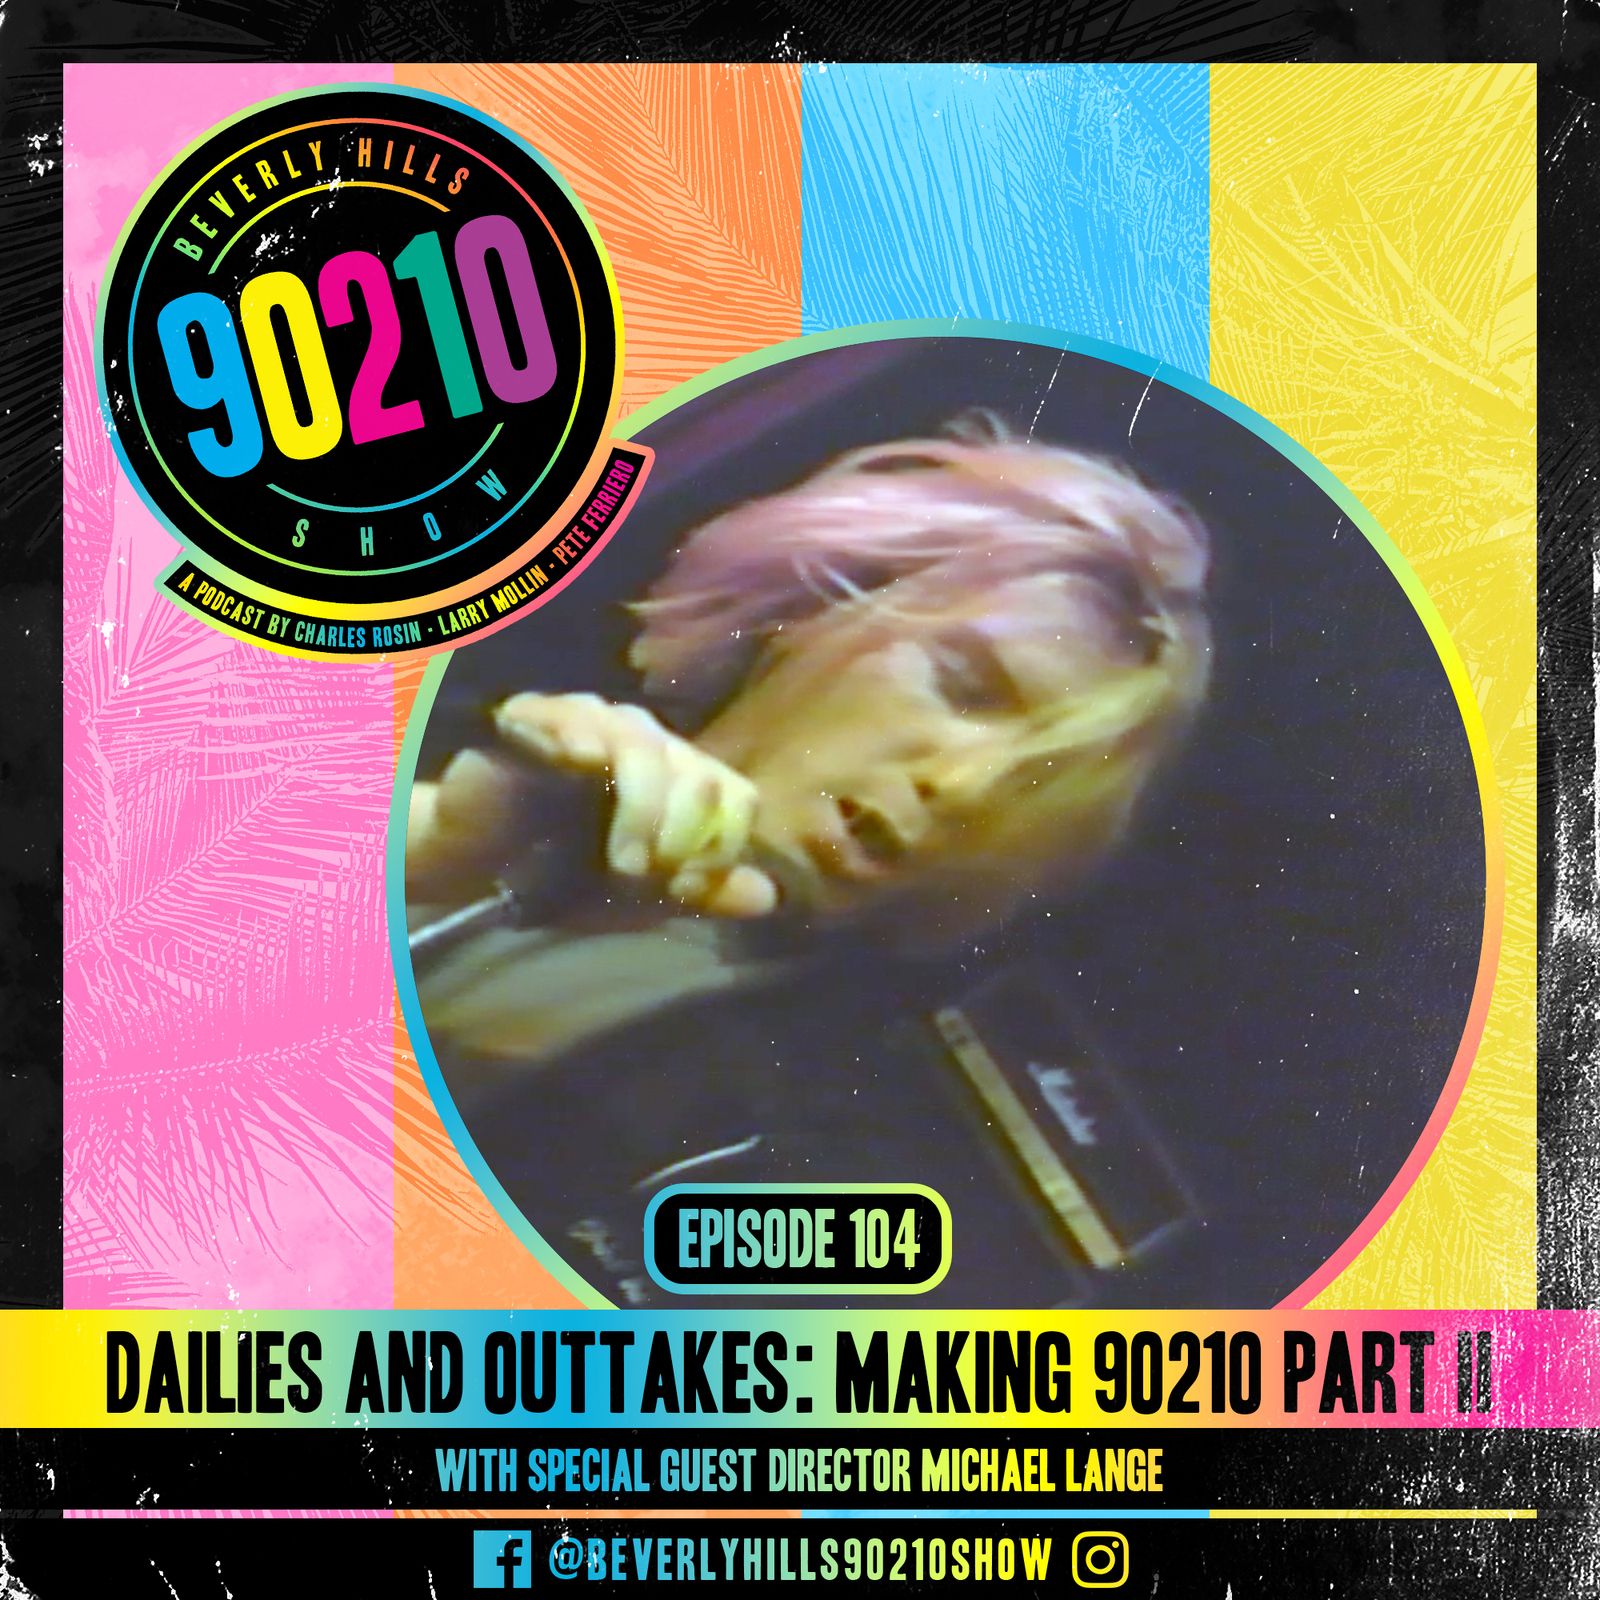 104: Dallies and Outtakes Part 2: Making 90210